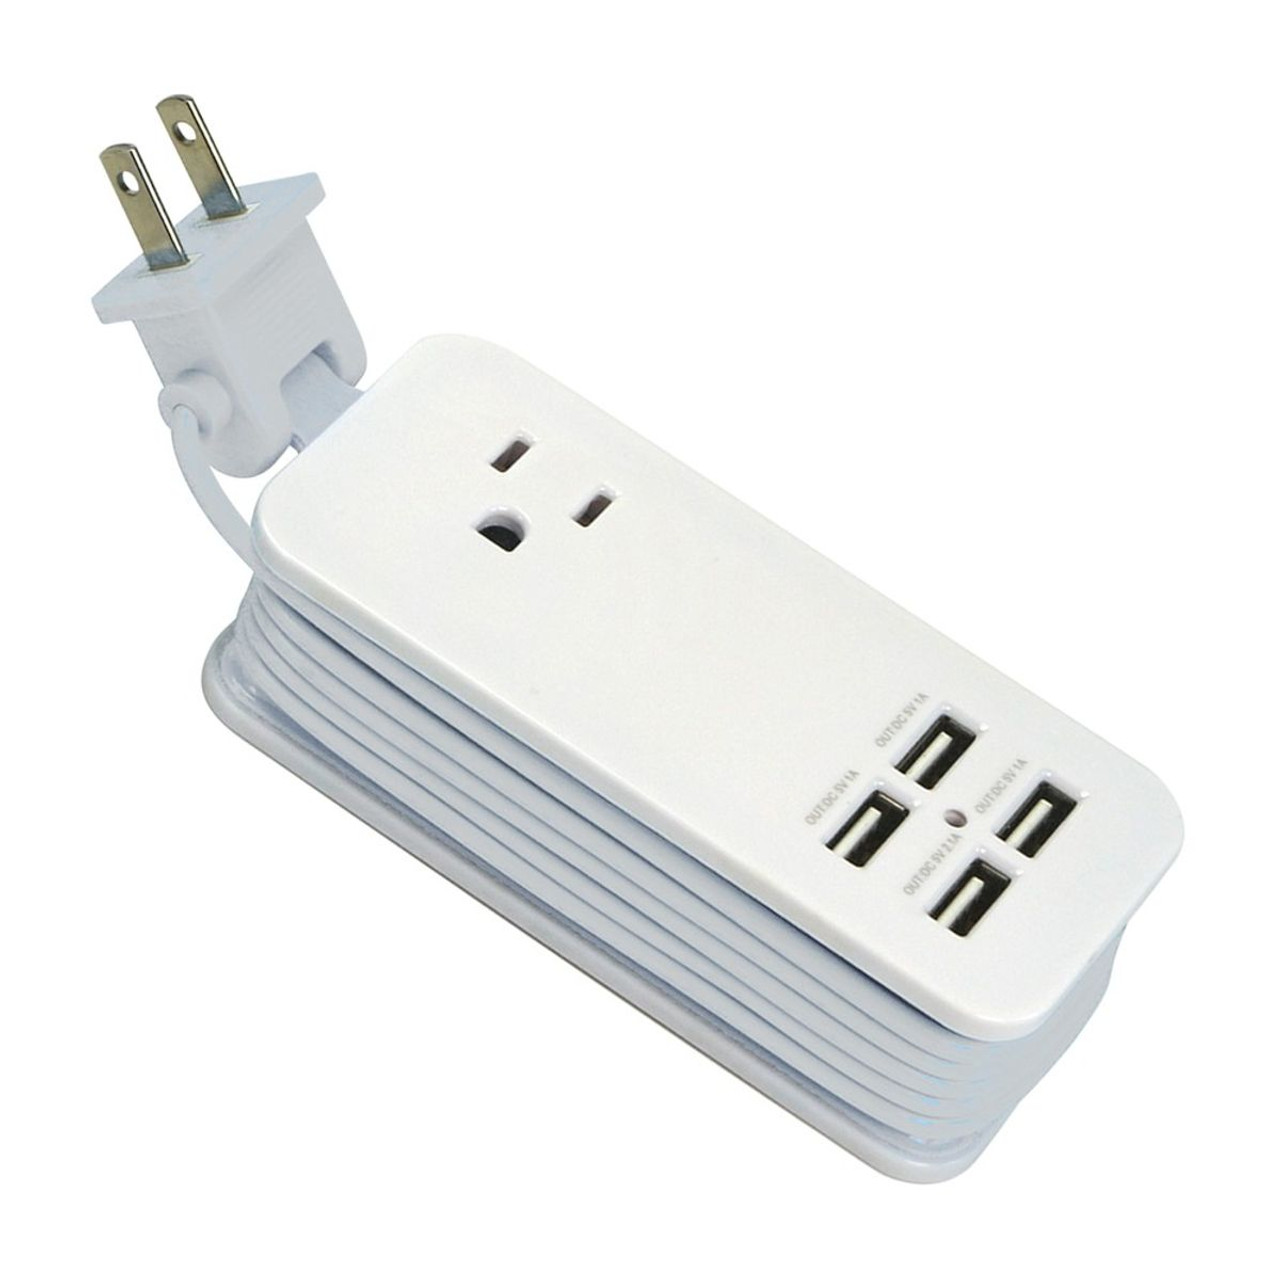 Travel Power Strip with 4 USB Ports (2-Pack) product image